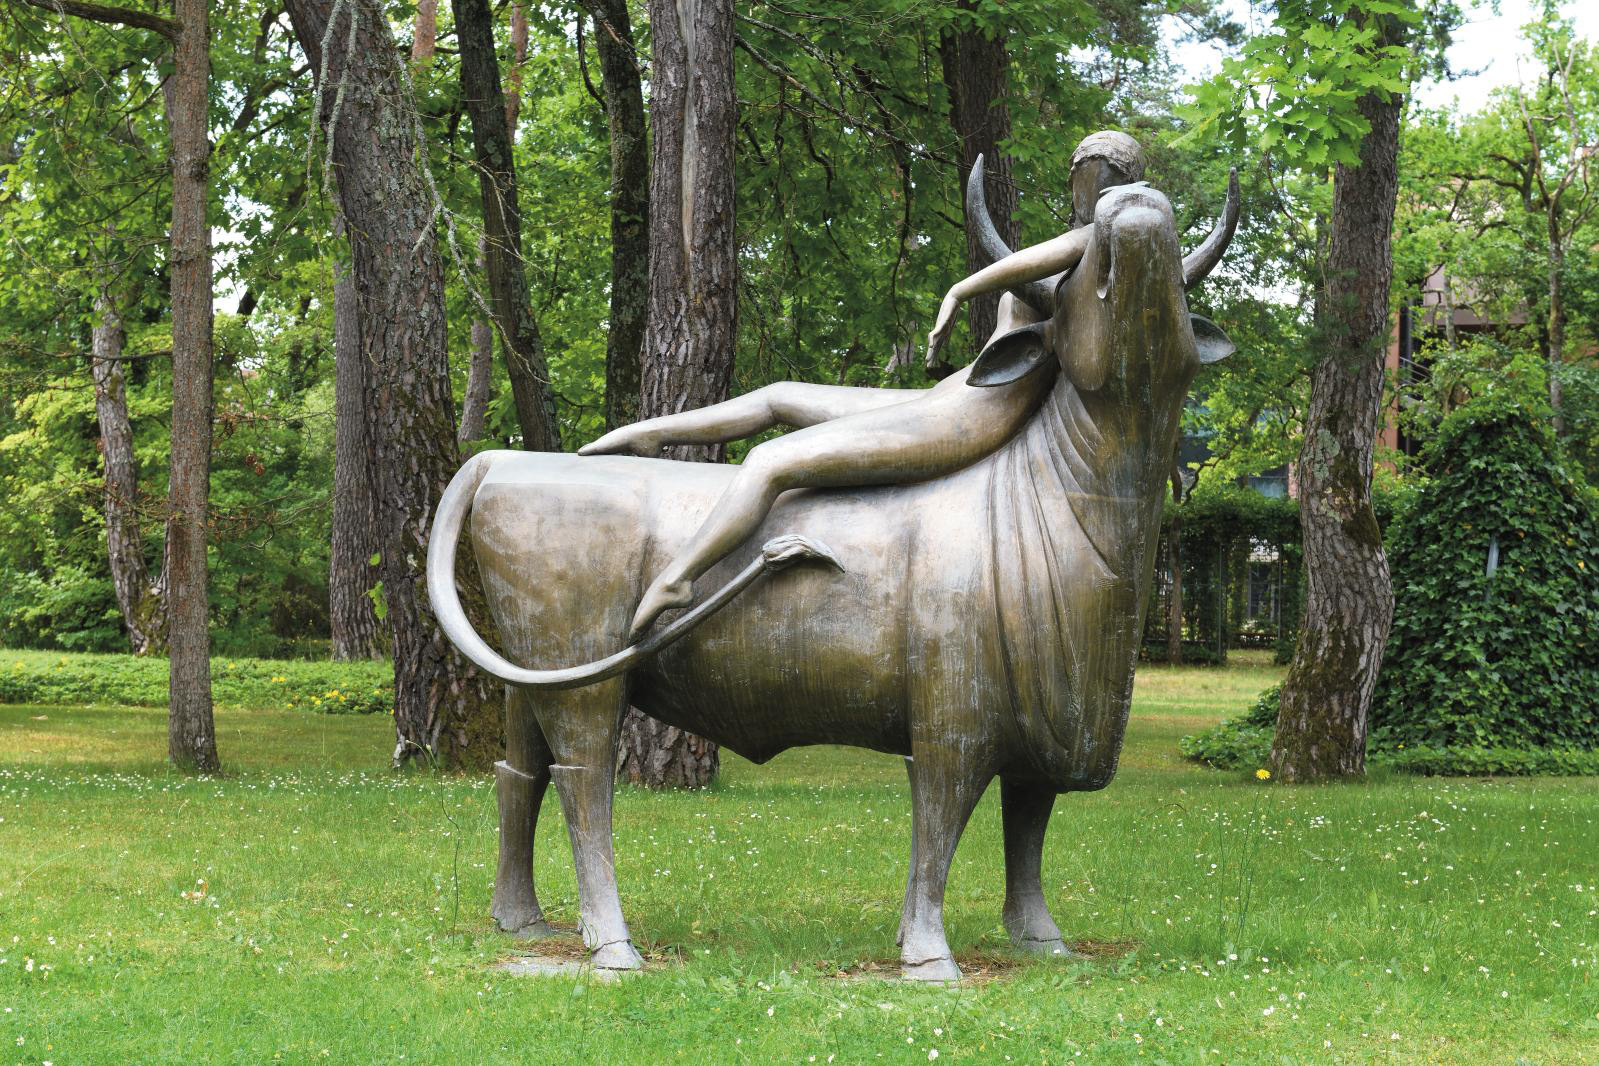 Monumental Sculptures from the Lalanne Couple